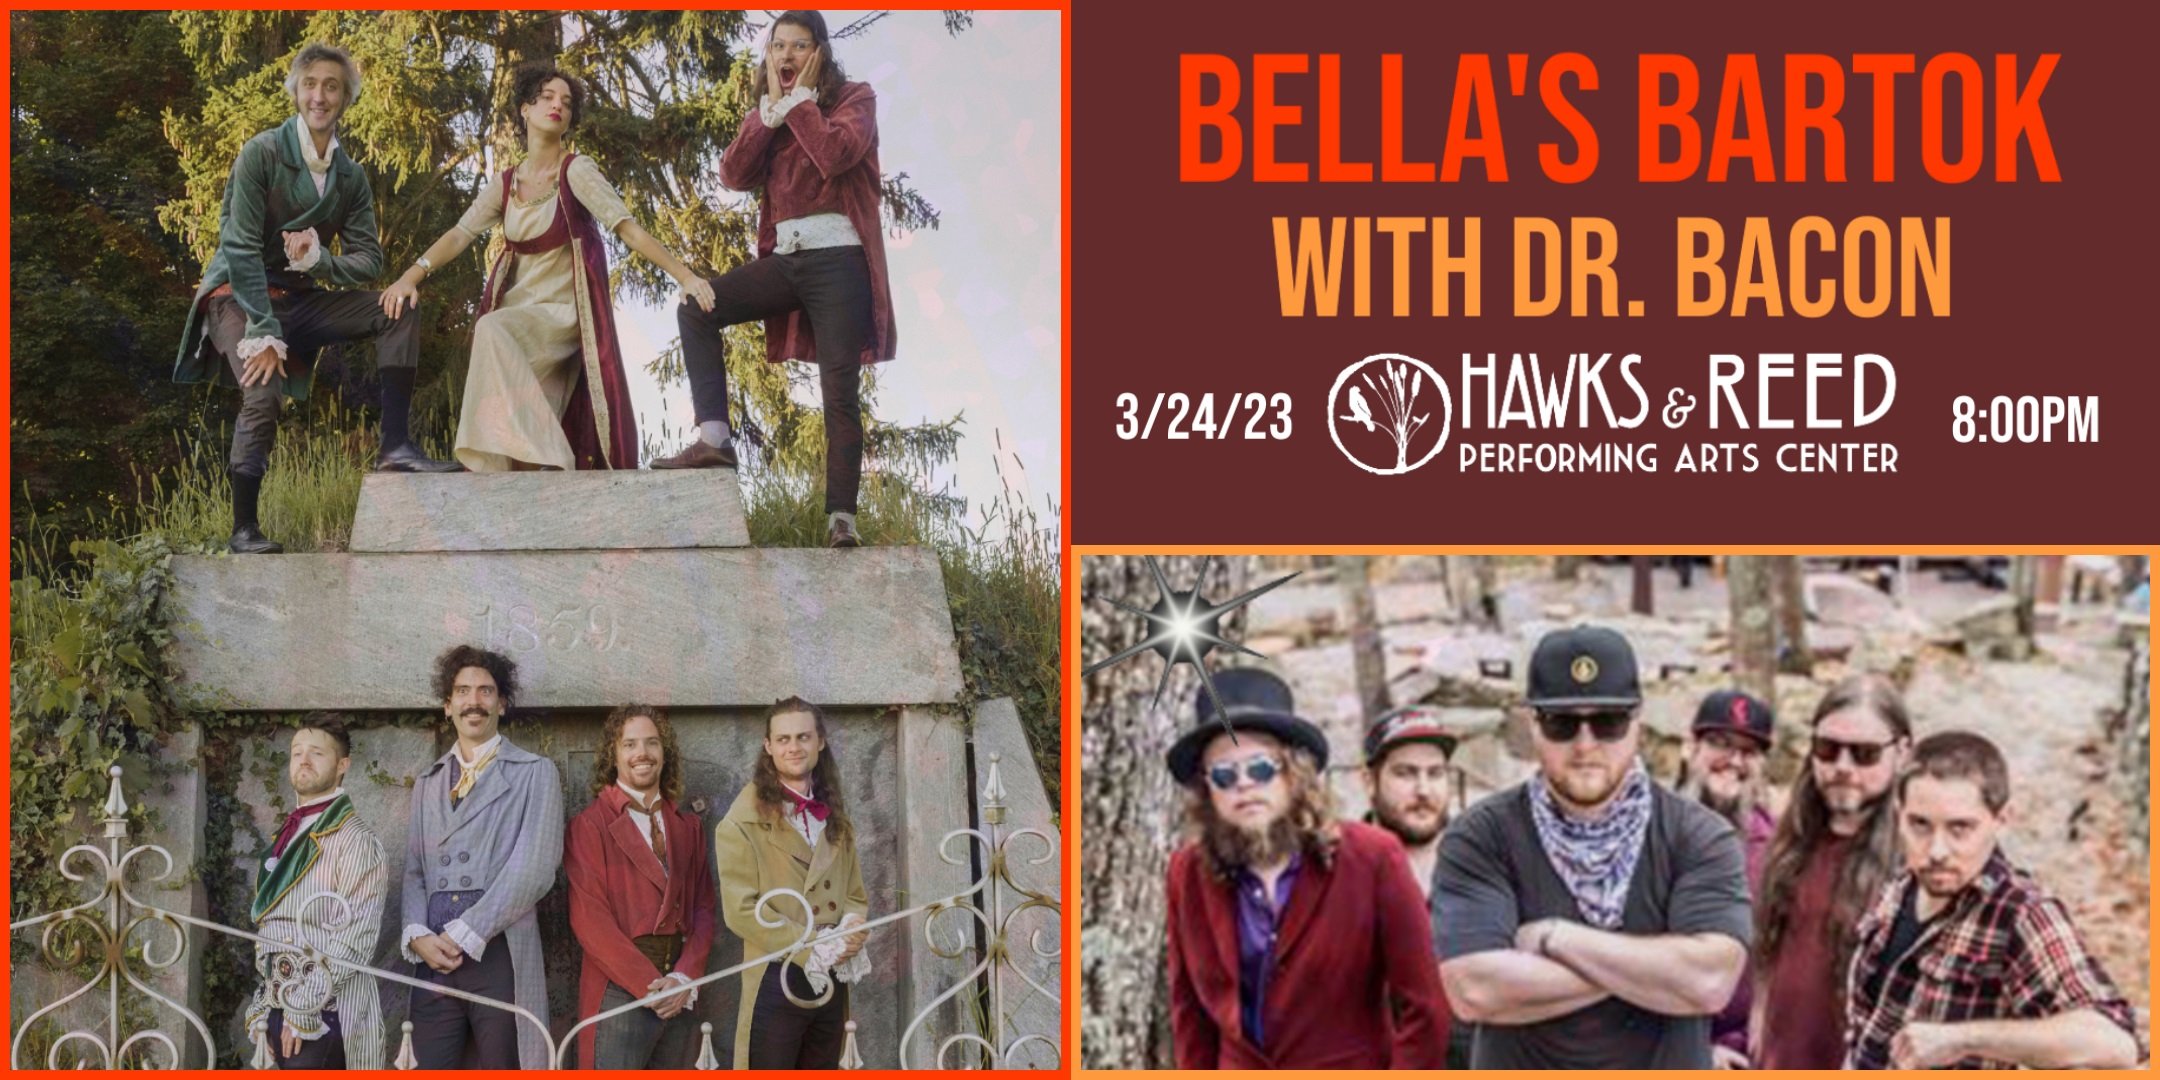 Bella’s Bartok with Dr. Bacon at Hawks & Reed